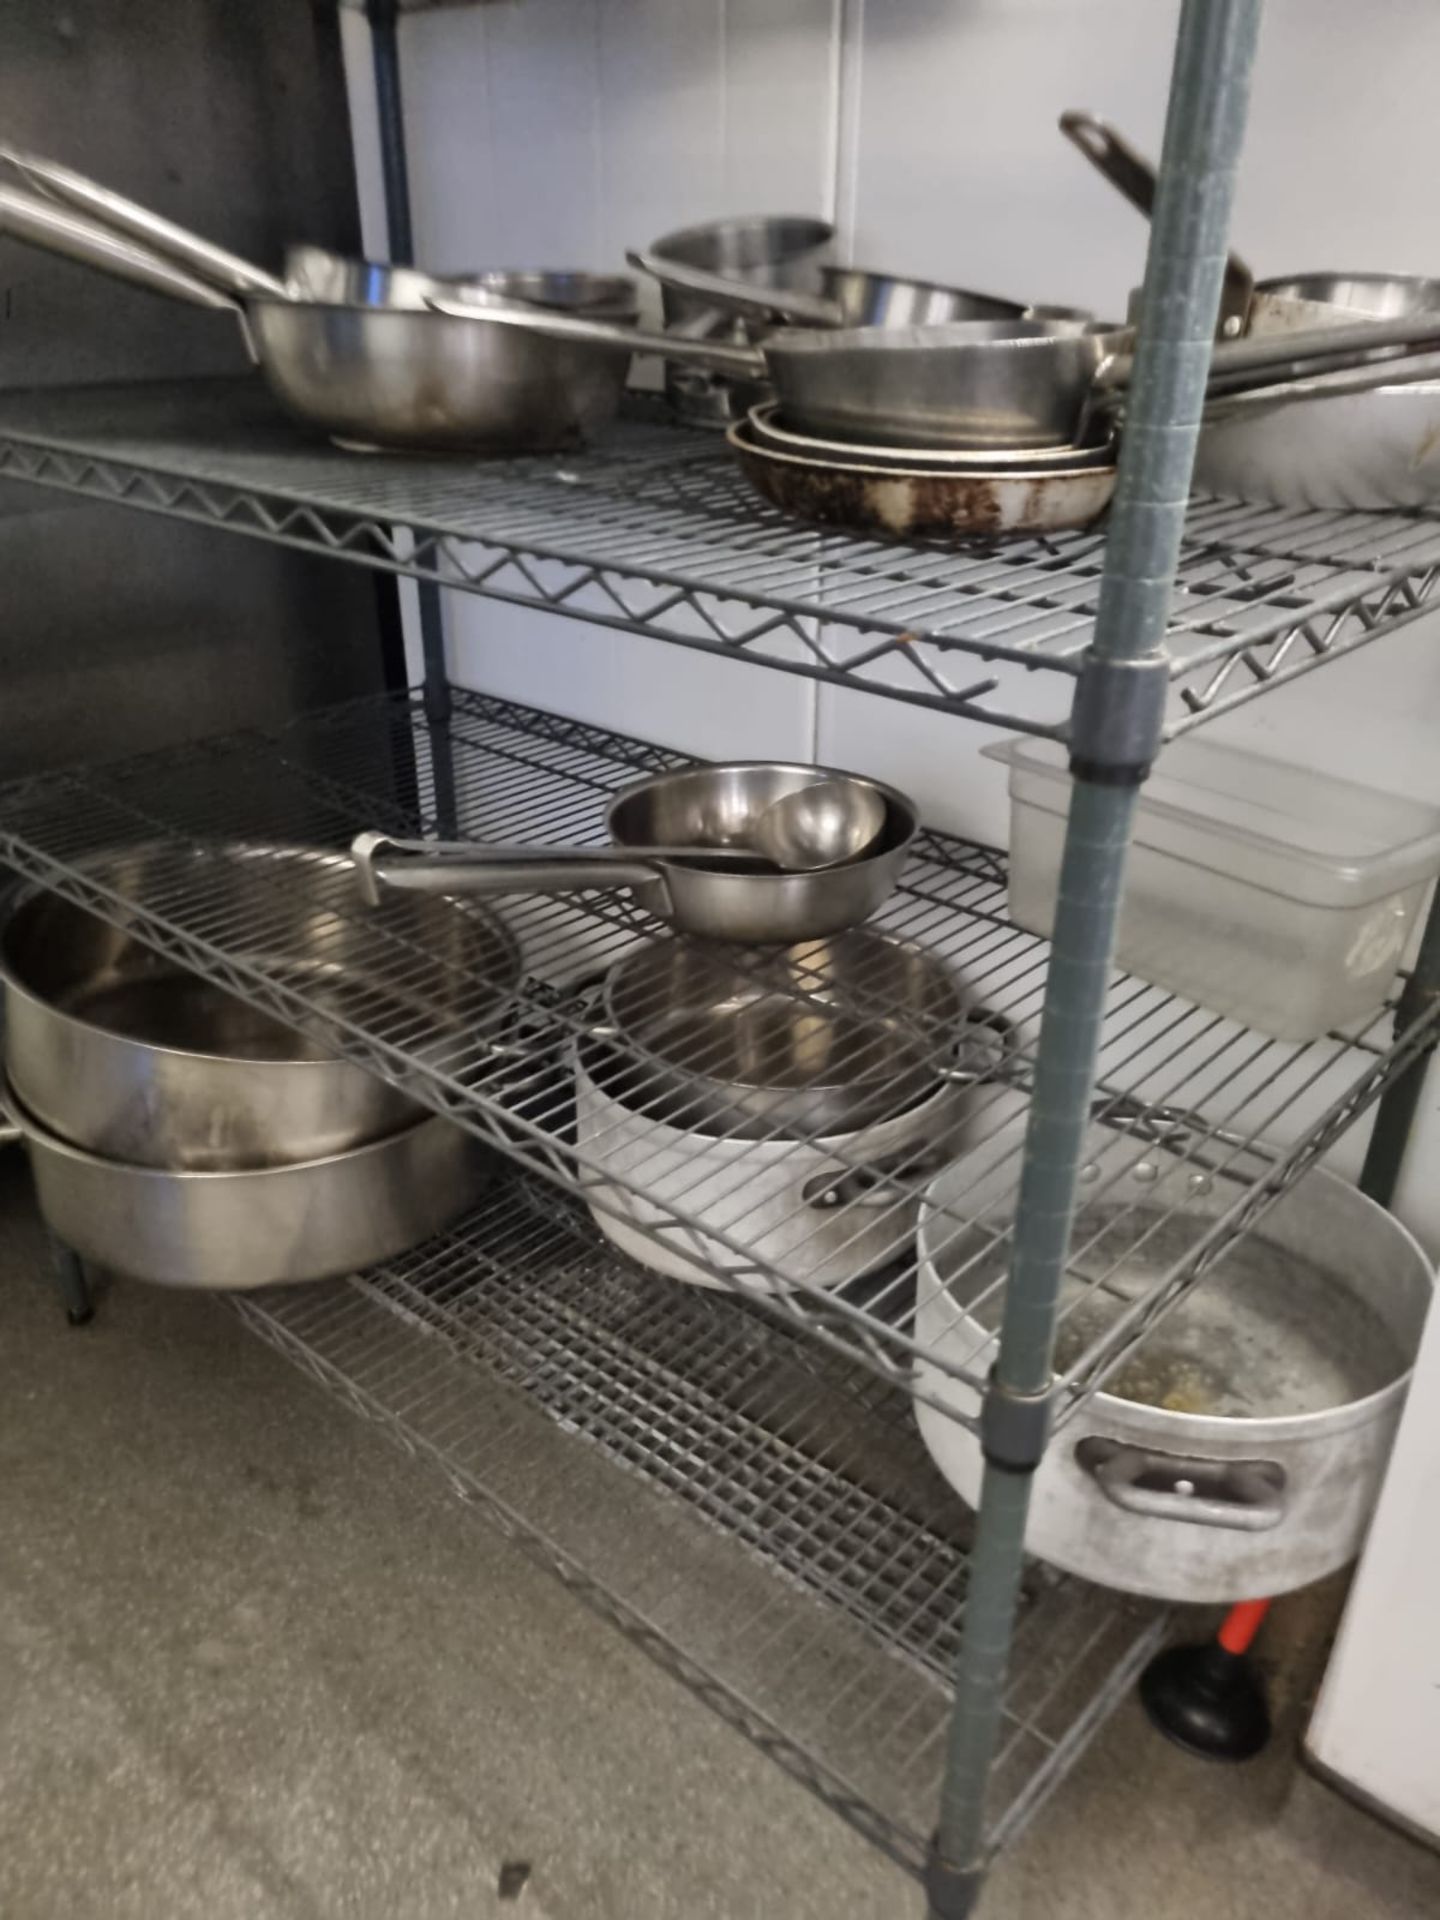 OEM- Various suacepans, stock pots and fry pans as photographed ( Main Kitchen ) - Image 2 of 4